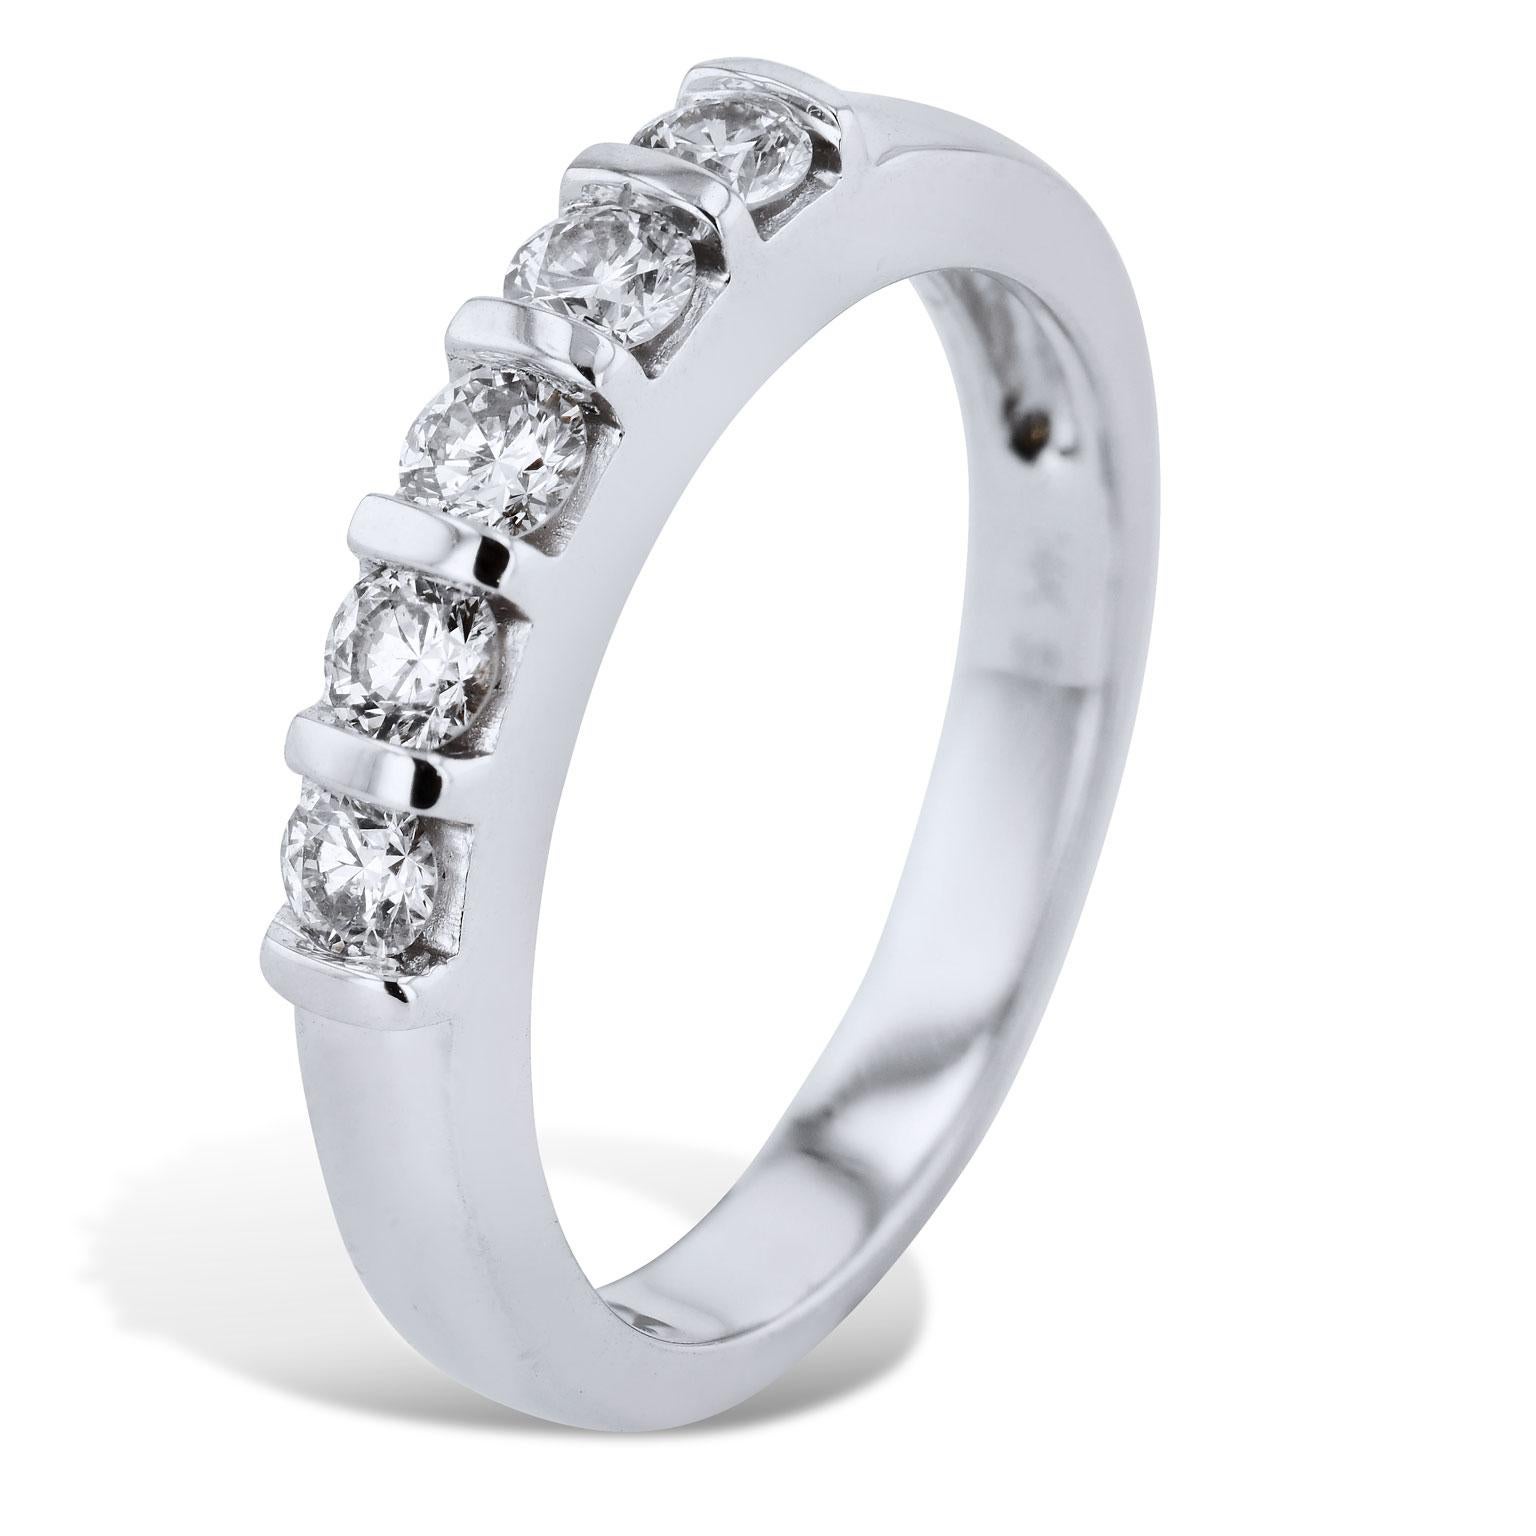 Estate 0.50 Carat White Diamond and 14 karat White Gold Band Ring

0.50 carats of round brilliant cut diamond (J/K/SI2) are bar set and affixed to a 14 karat white gold shank. 
This previously loved band ring provides a spectrum of light and color